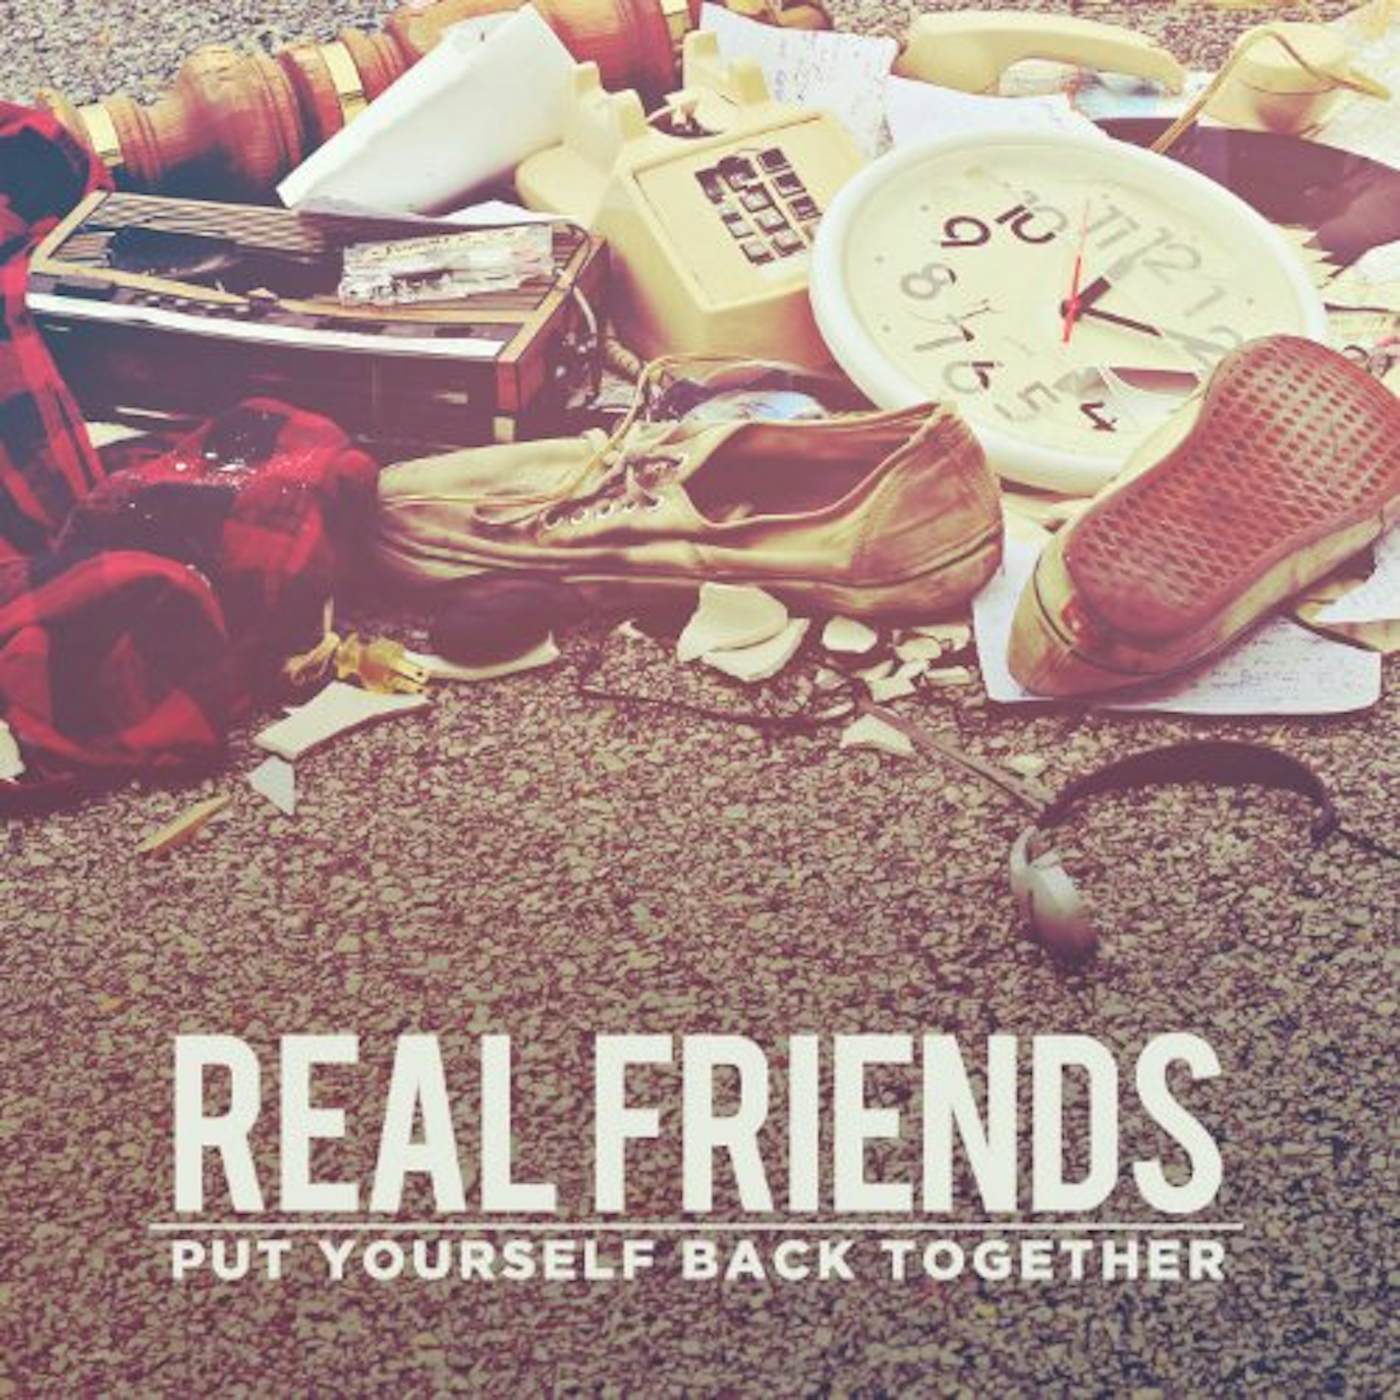 Real Friends Put Yourself Back Together Vinyl Record